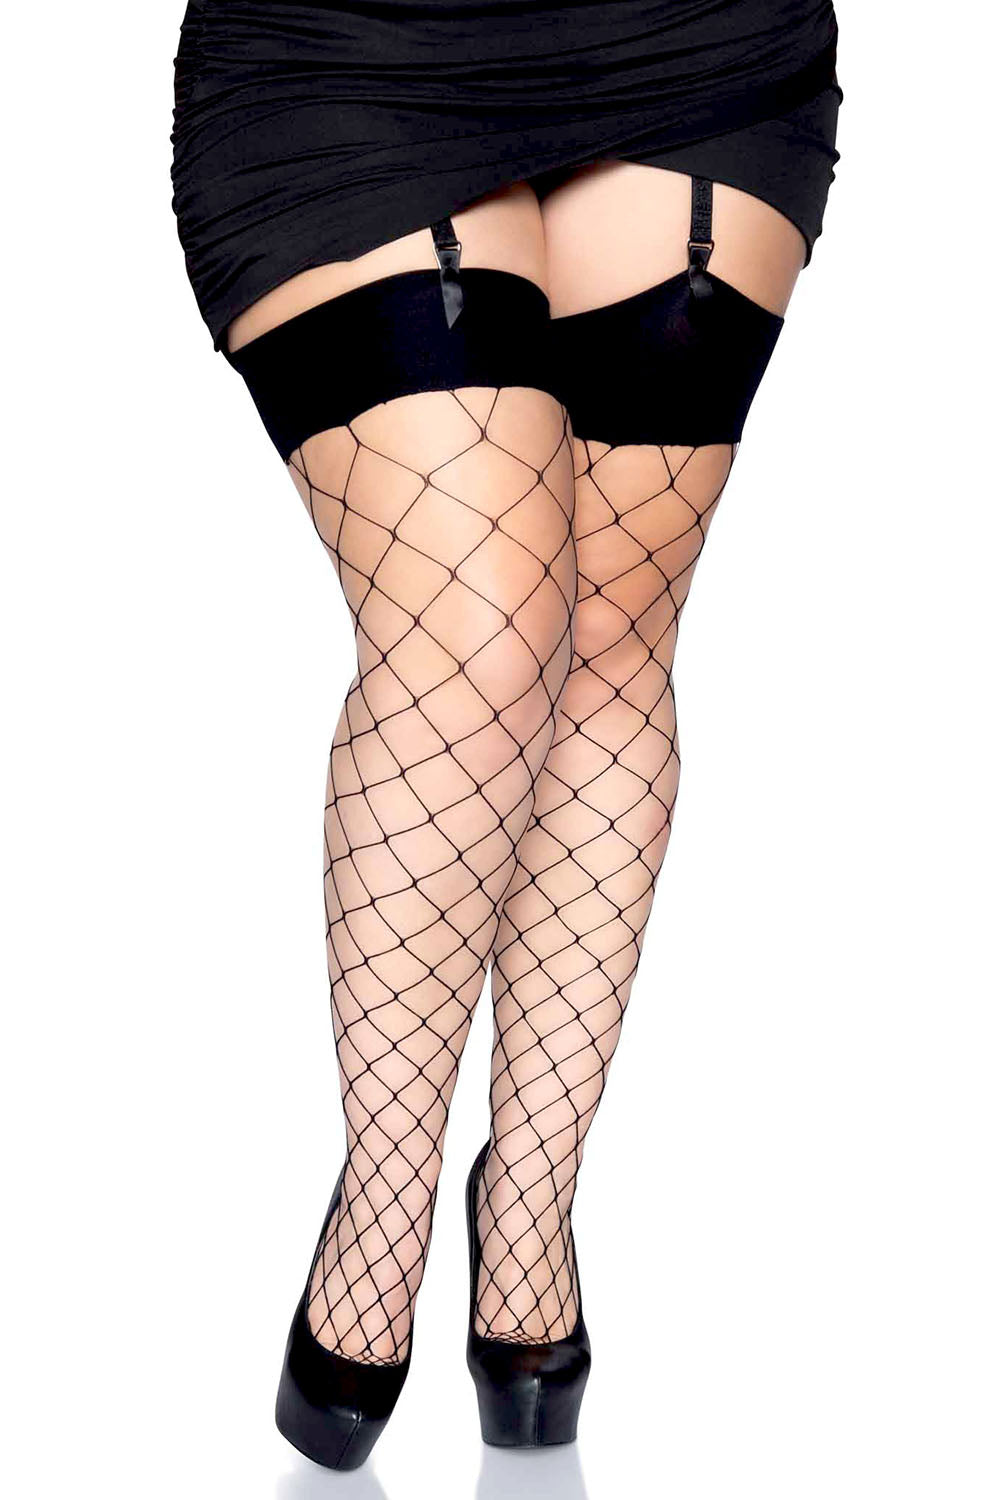 dexter montoya recommends plus size fishnet thigh high stockings pic